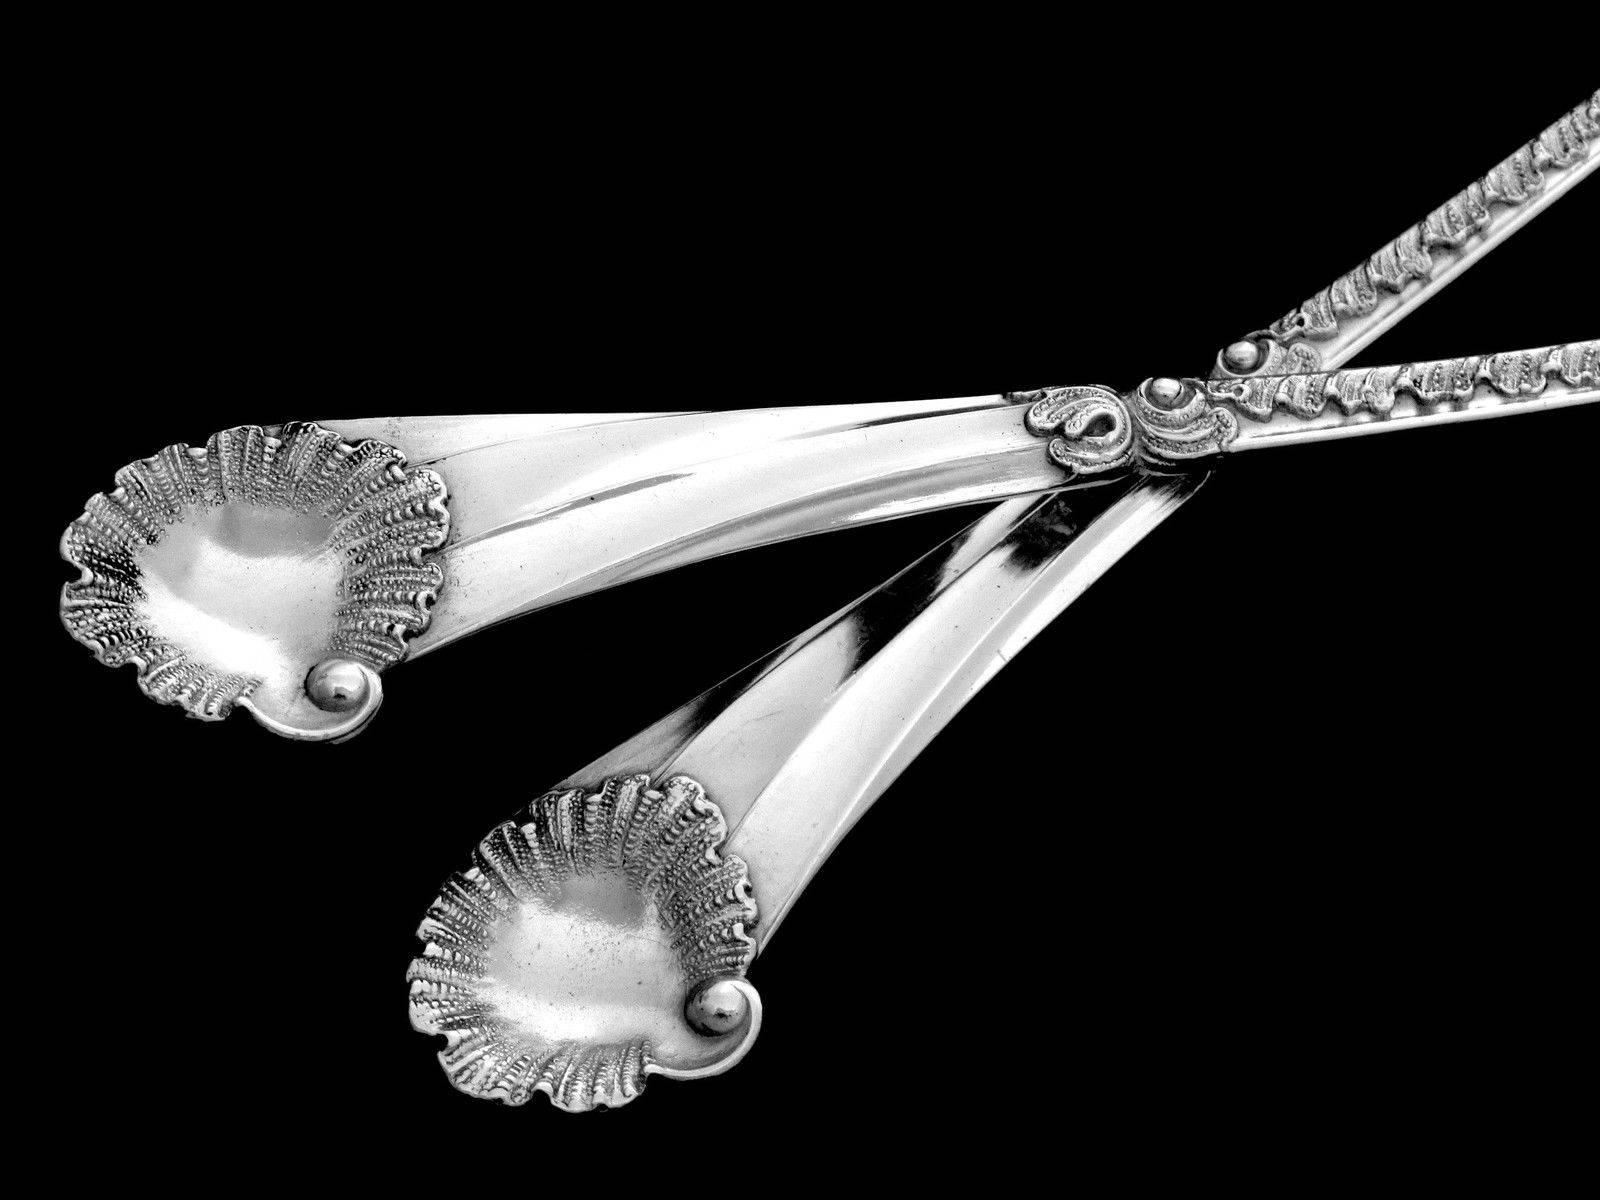 Rococo Soufflot Rare French All Sterling Silver 18-Karat Gold Ice Cream Servers For Sale